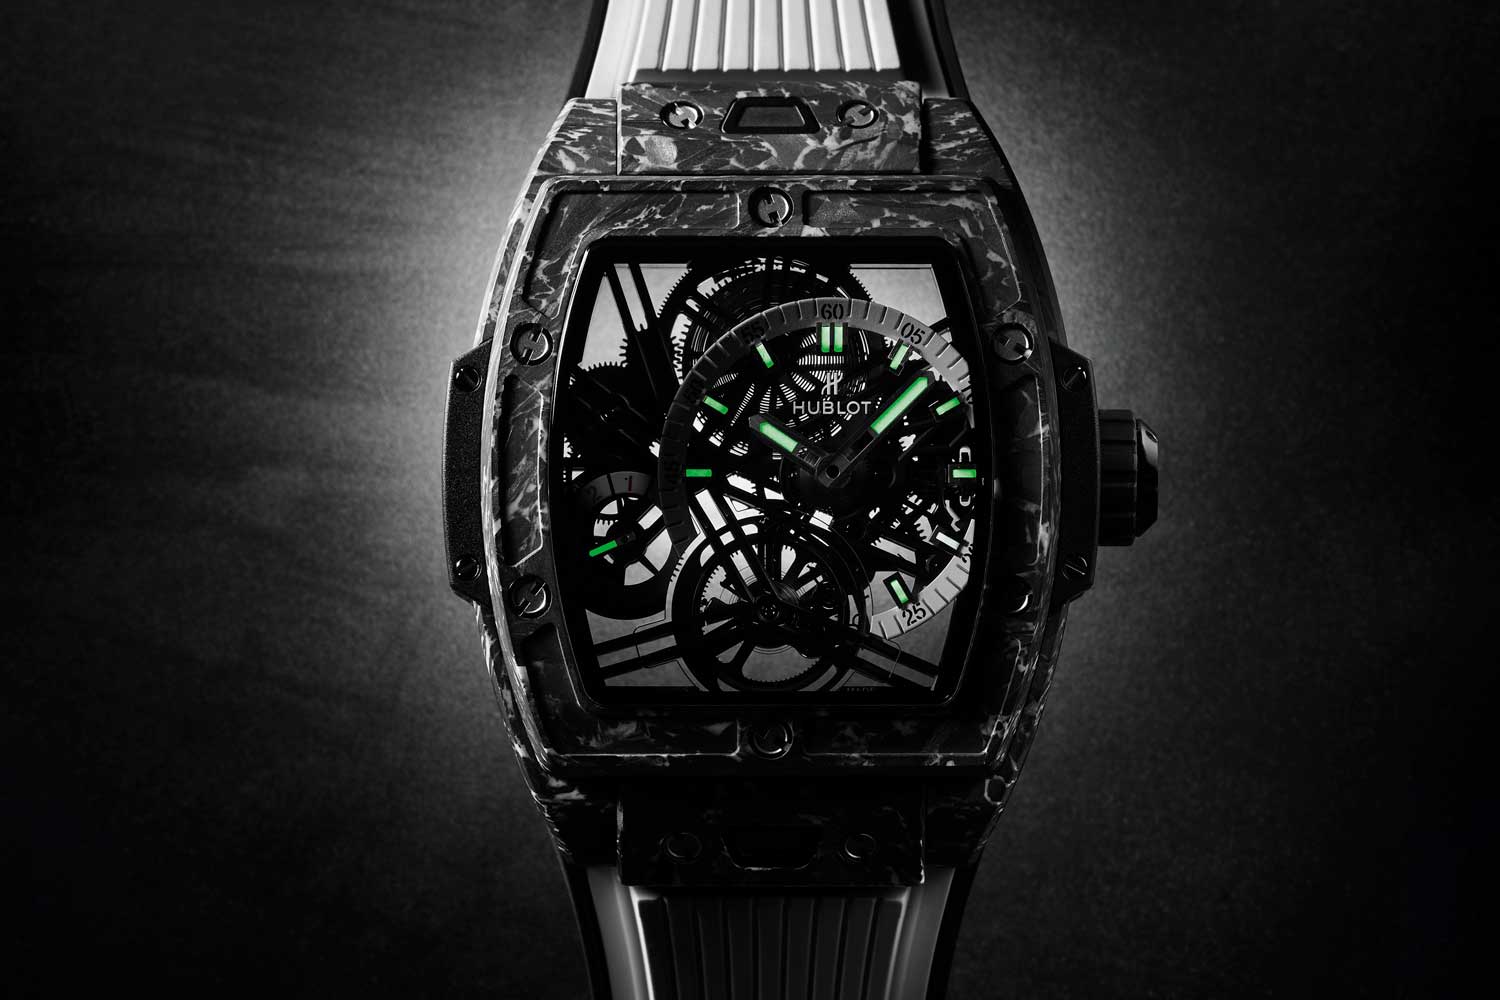 The HUB6020 manufacture movement is a skeleton tourbillon with an impressive 115-hour power reserve